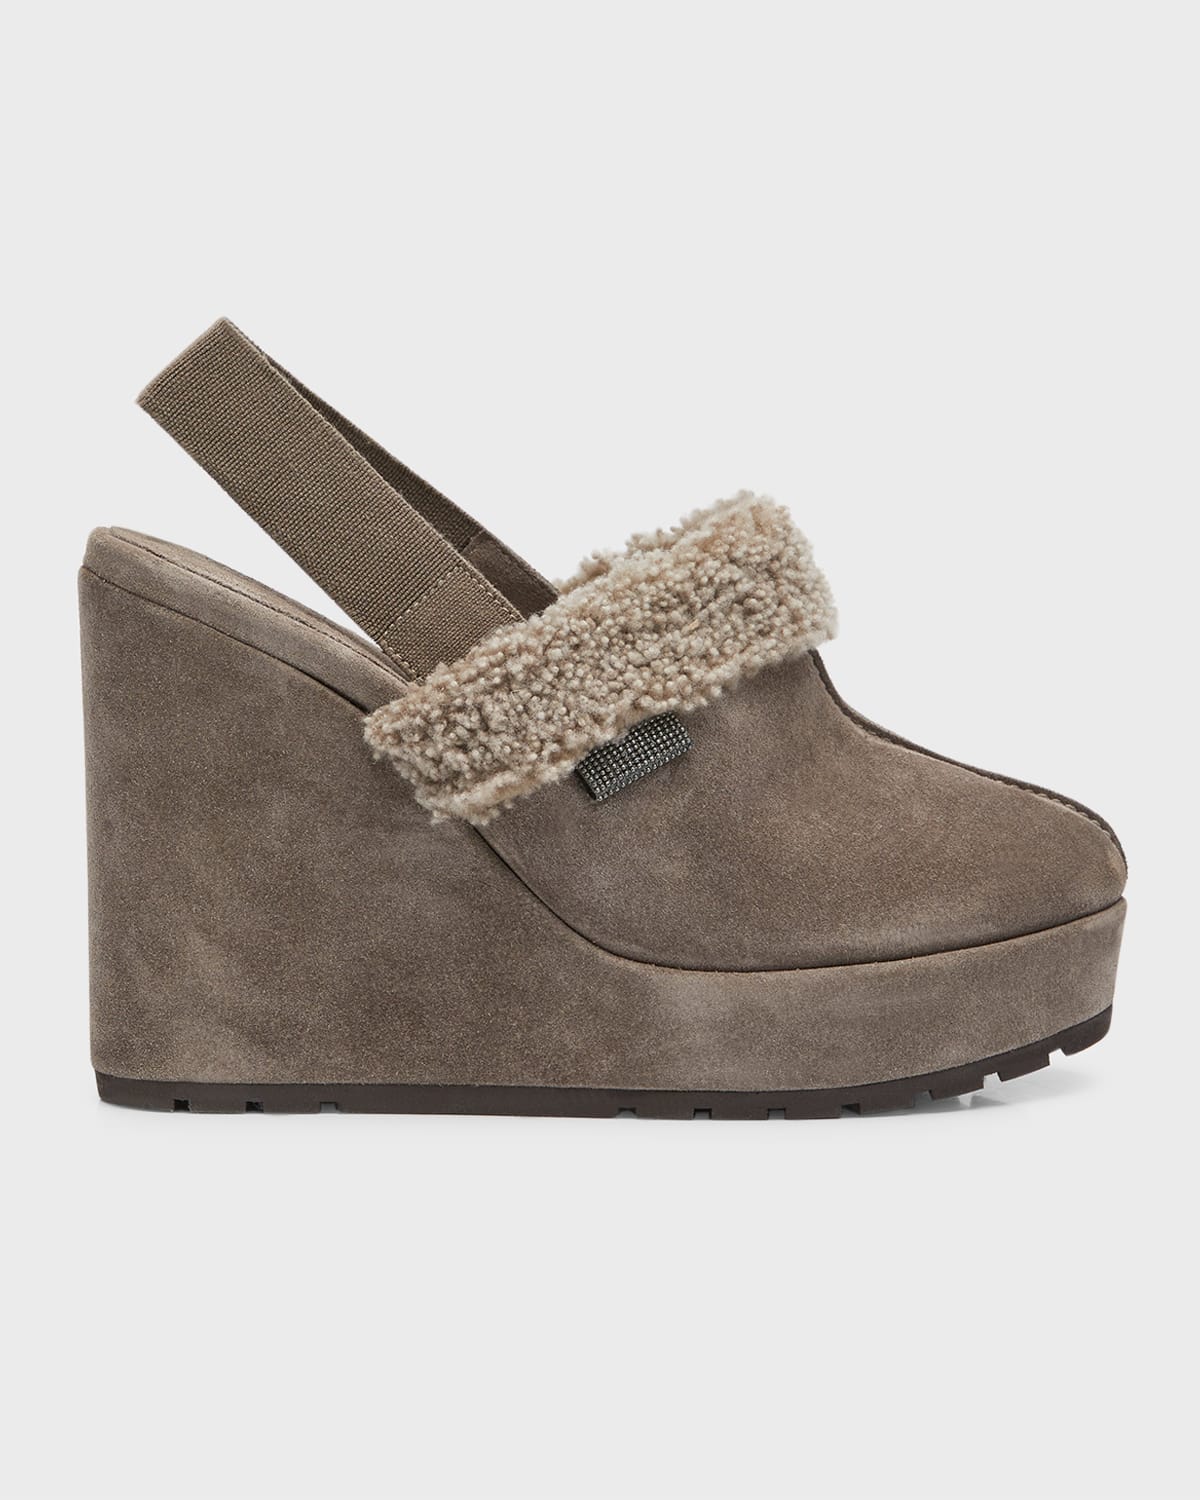 BRUNELLO CUCINELLI SUEDE SHEARLING WEDGE SLINGBACK CLOGS